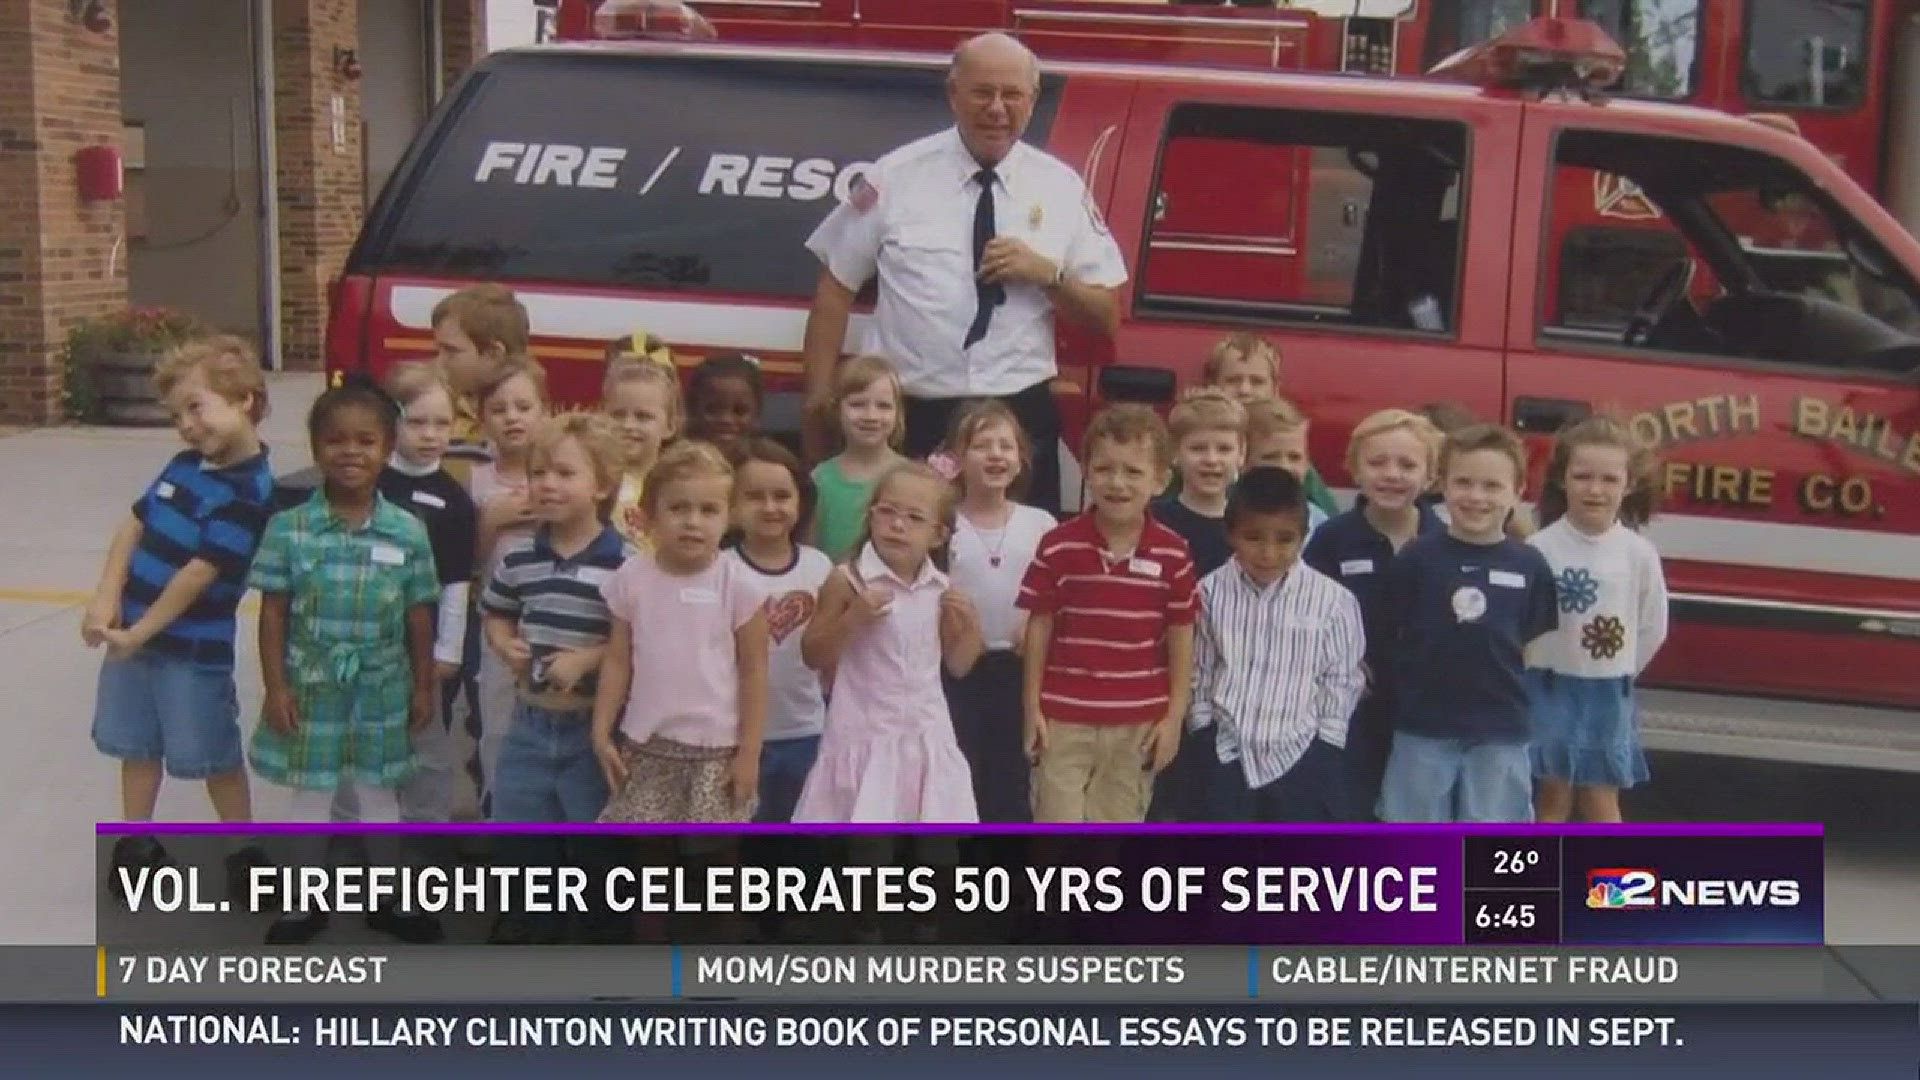 Daybreak's Melissa Holmes reports on an Amherst volunteer firefighter's decades of service for the N. Bailey Fire Department in this Good Neighbors.